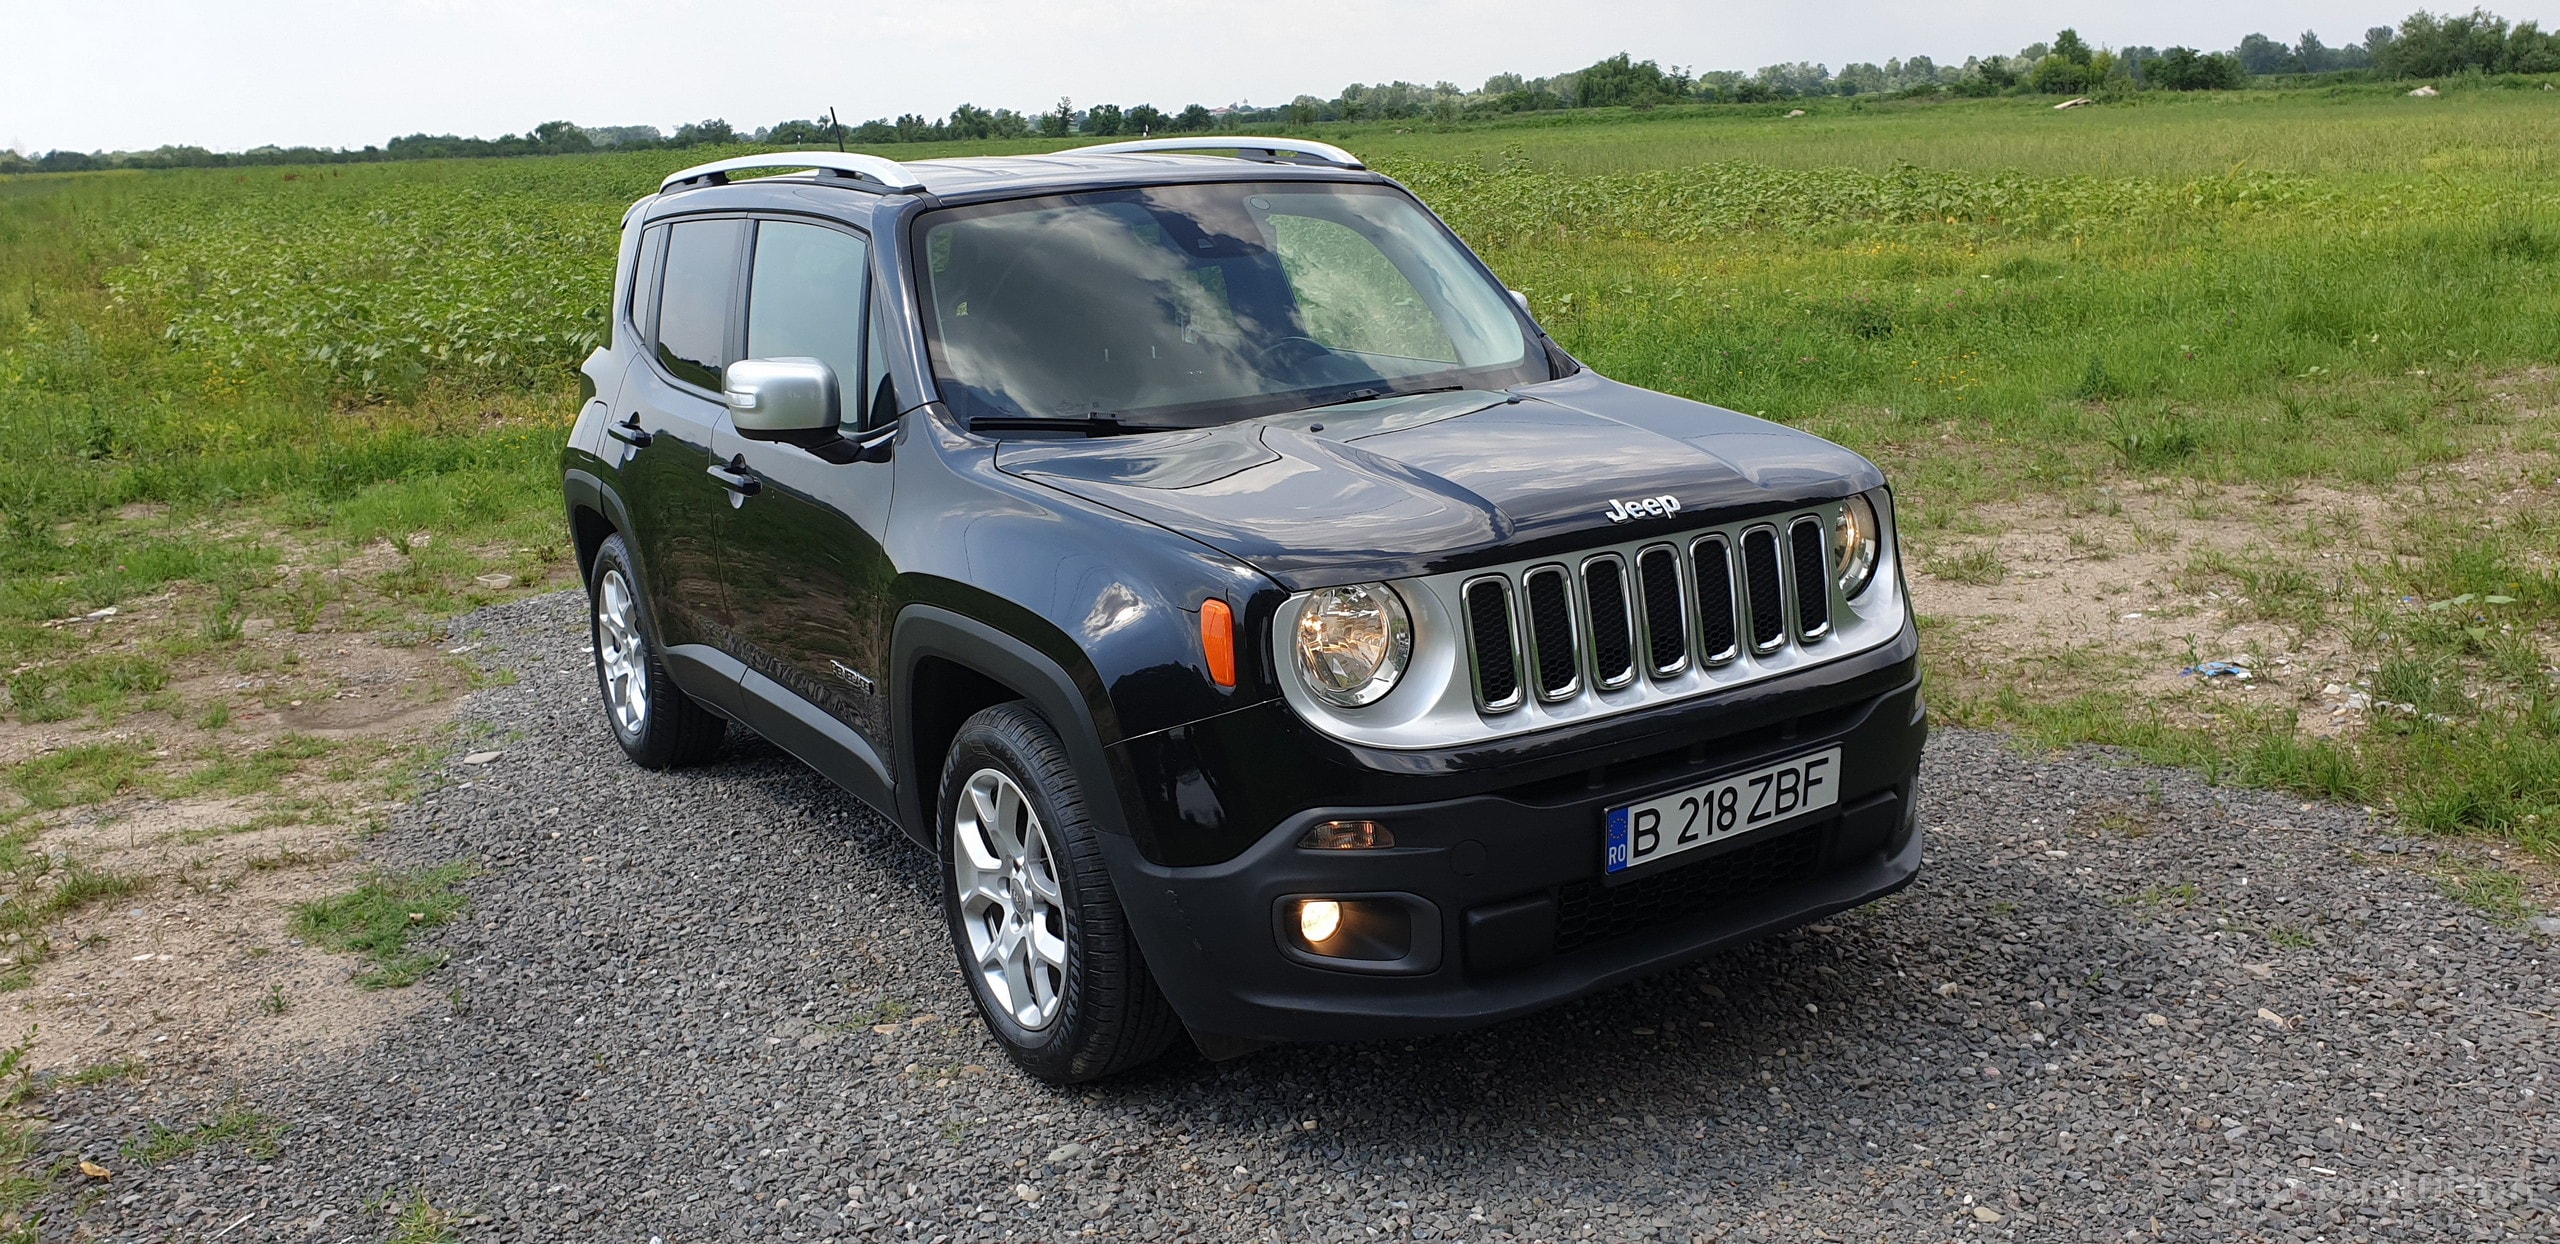 I Hate Crossovers, But I've Been Living With a Jeep Renegade for